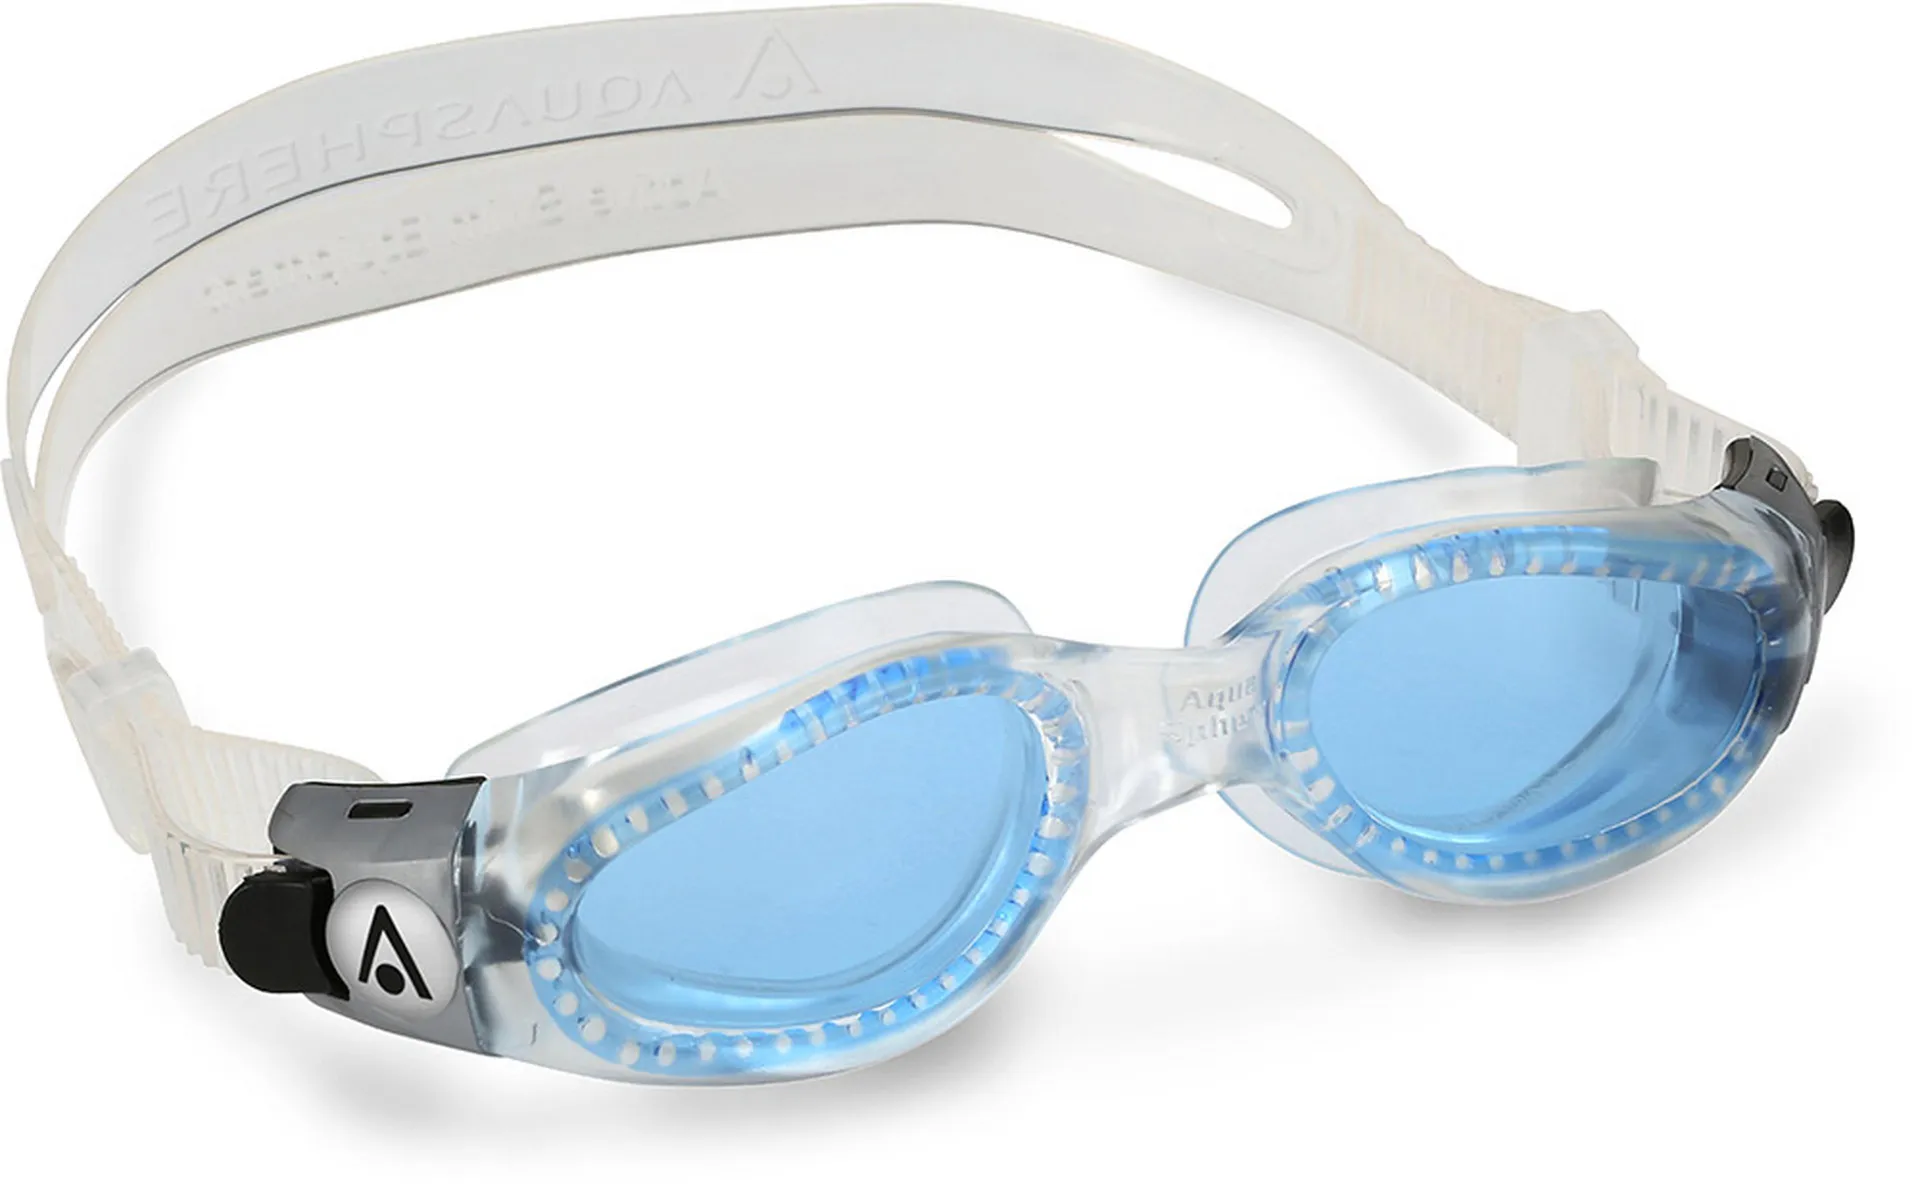 Aqua Sphere Kaiman Women's Goggles with Tinted Lens